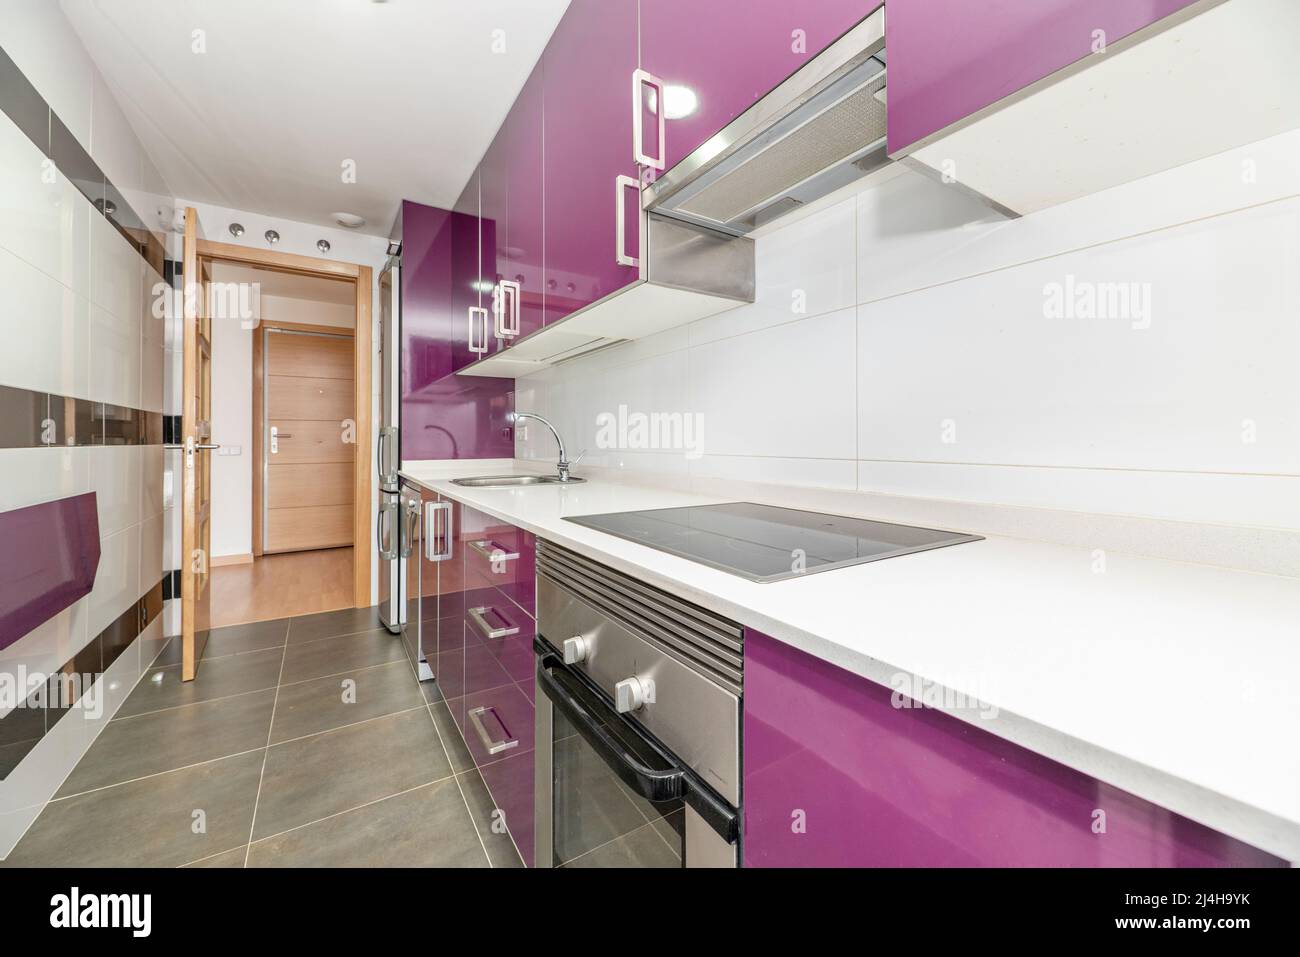 https://c8.alamy.com/comp/2J4H9YK/kitchen-with-white-stone-countertops-bright-purple-wood-cabinets-and-stainless-steel-appliances-2J4H9YK.jpg